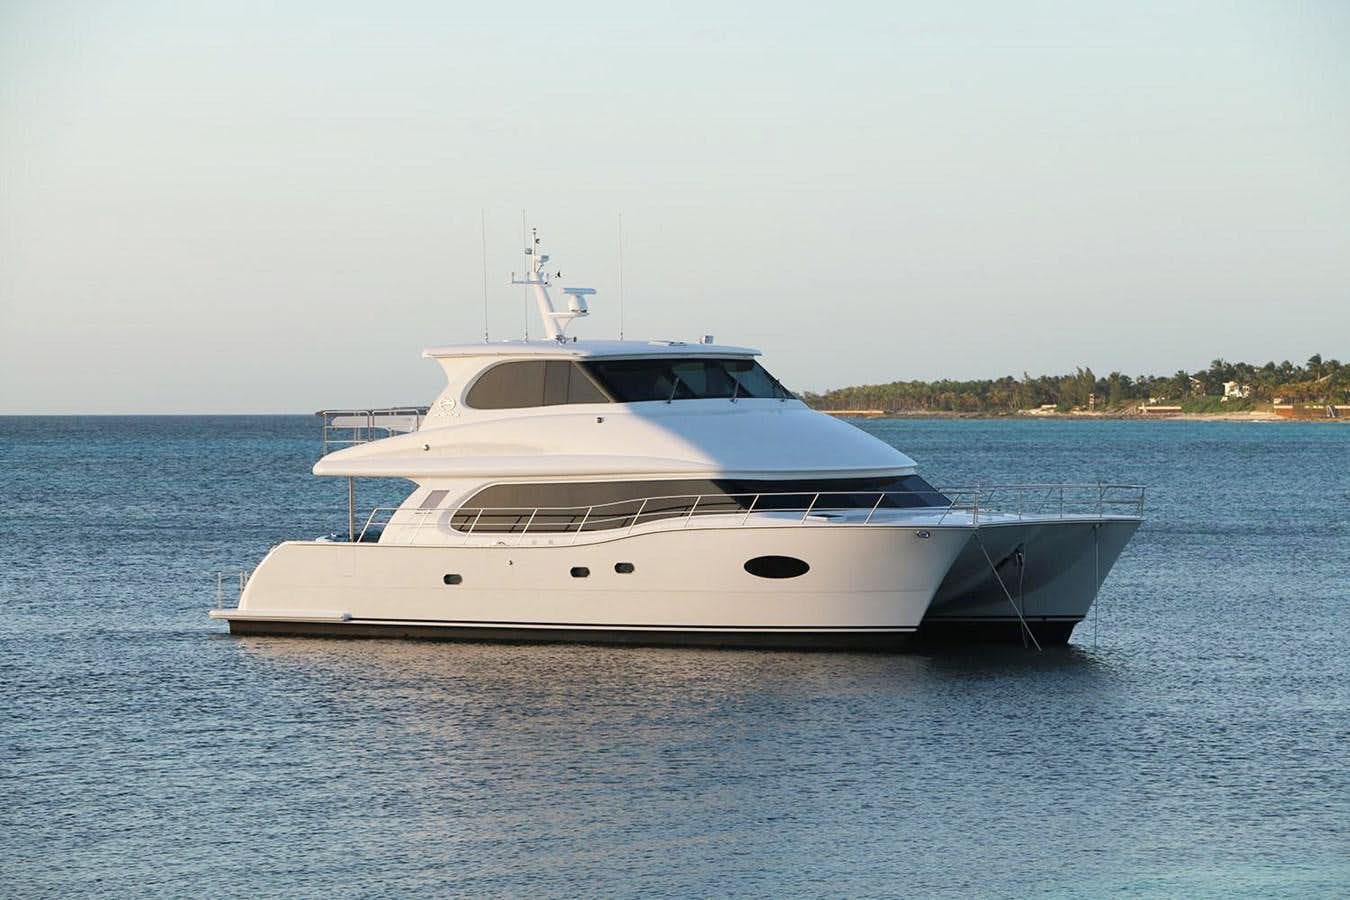 Blue abyss
Yacht for Sale